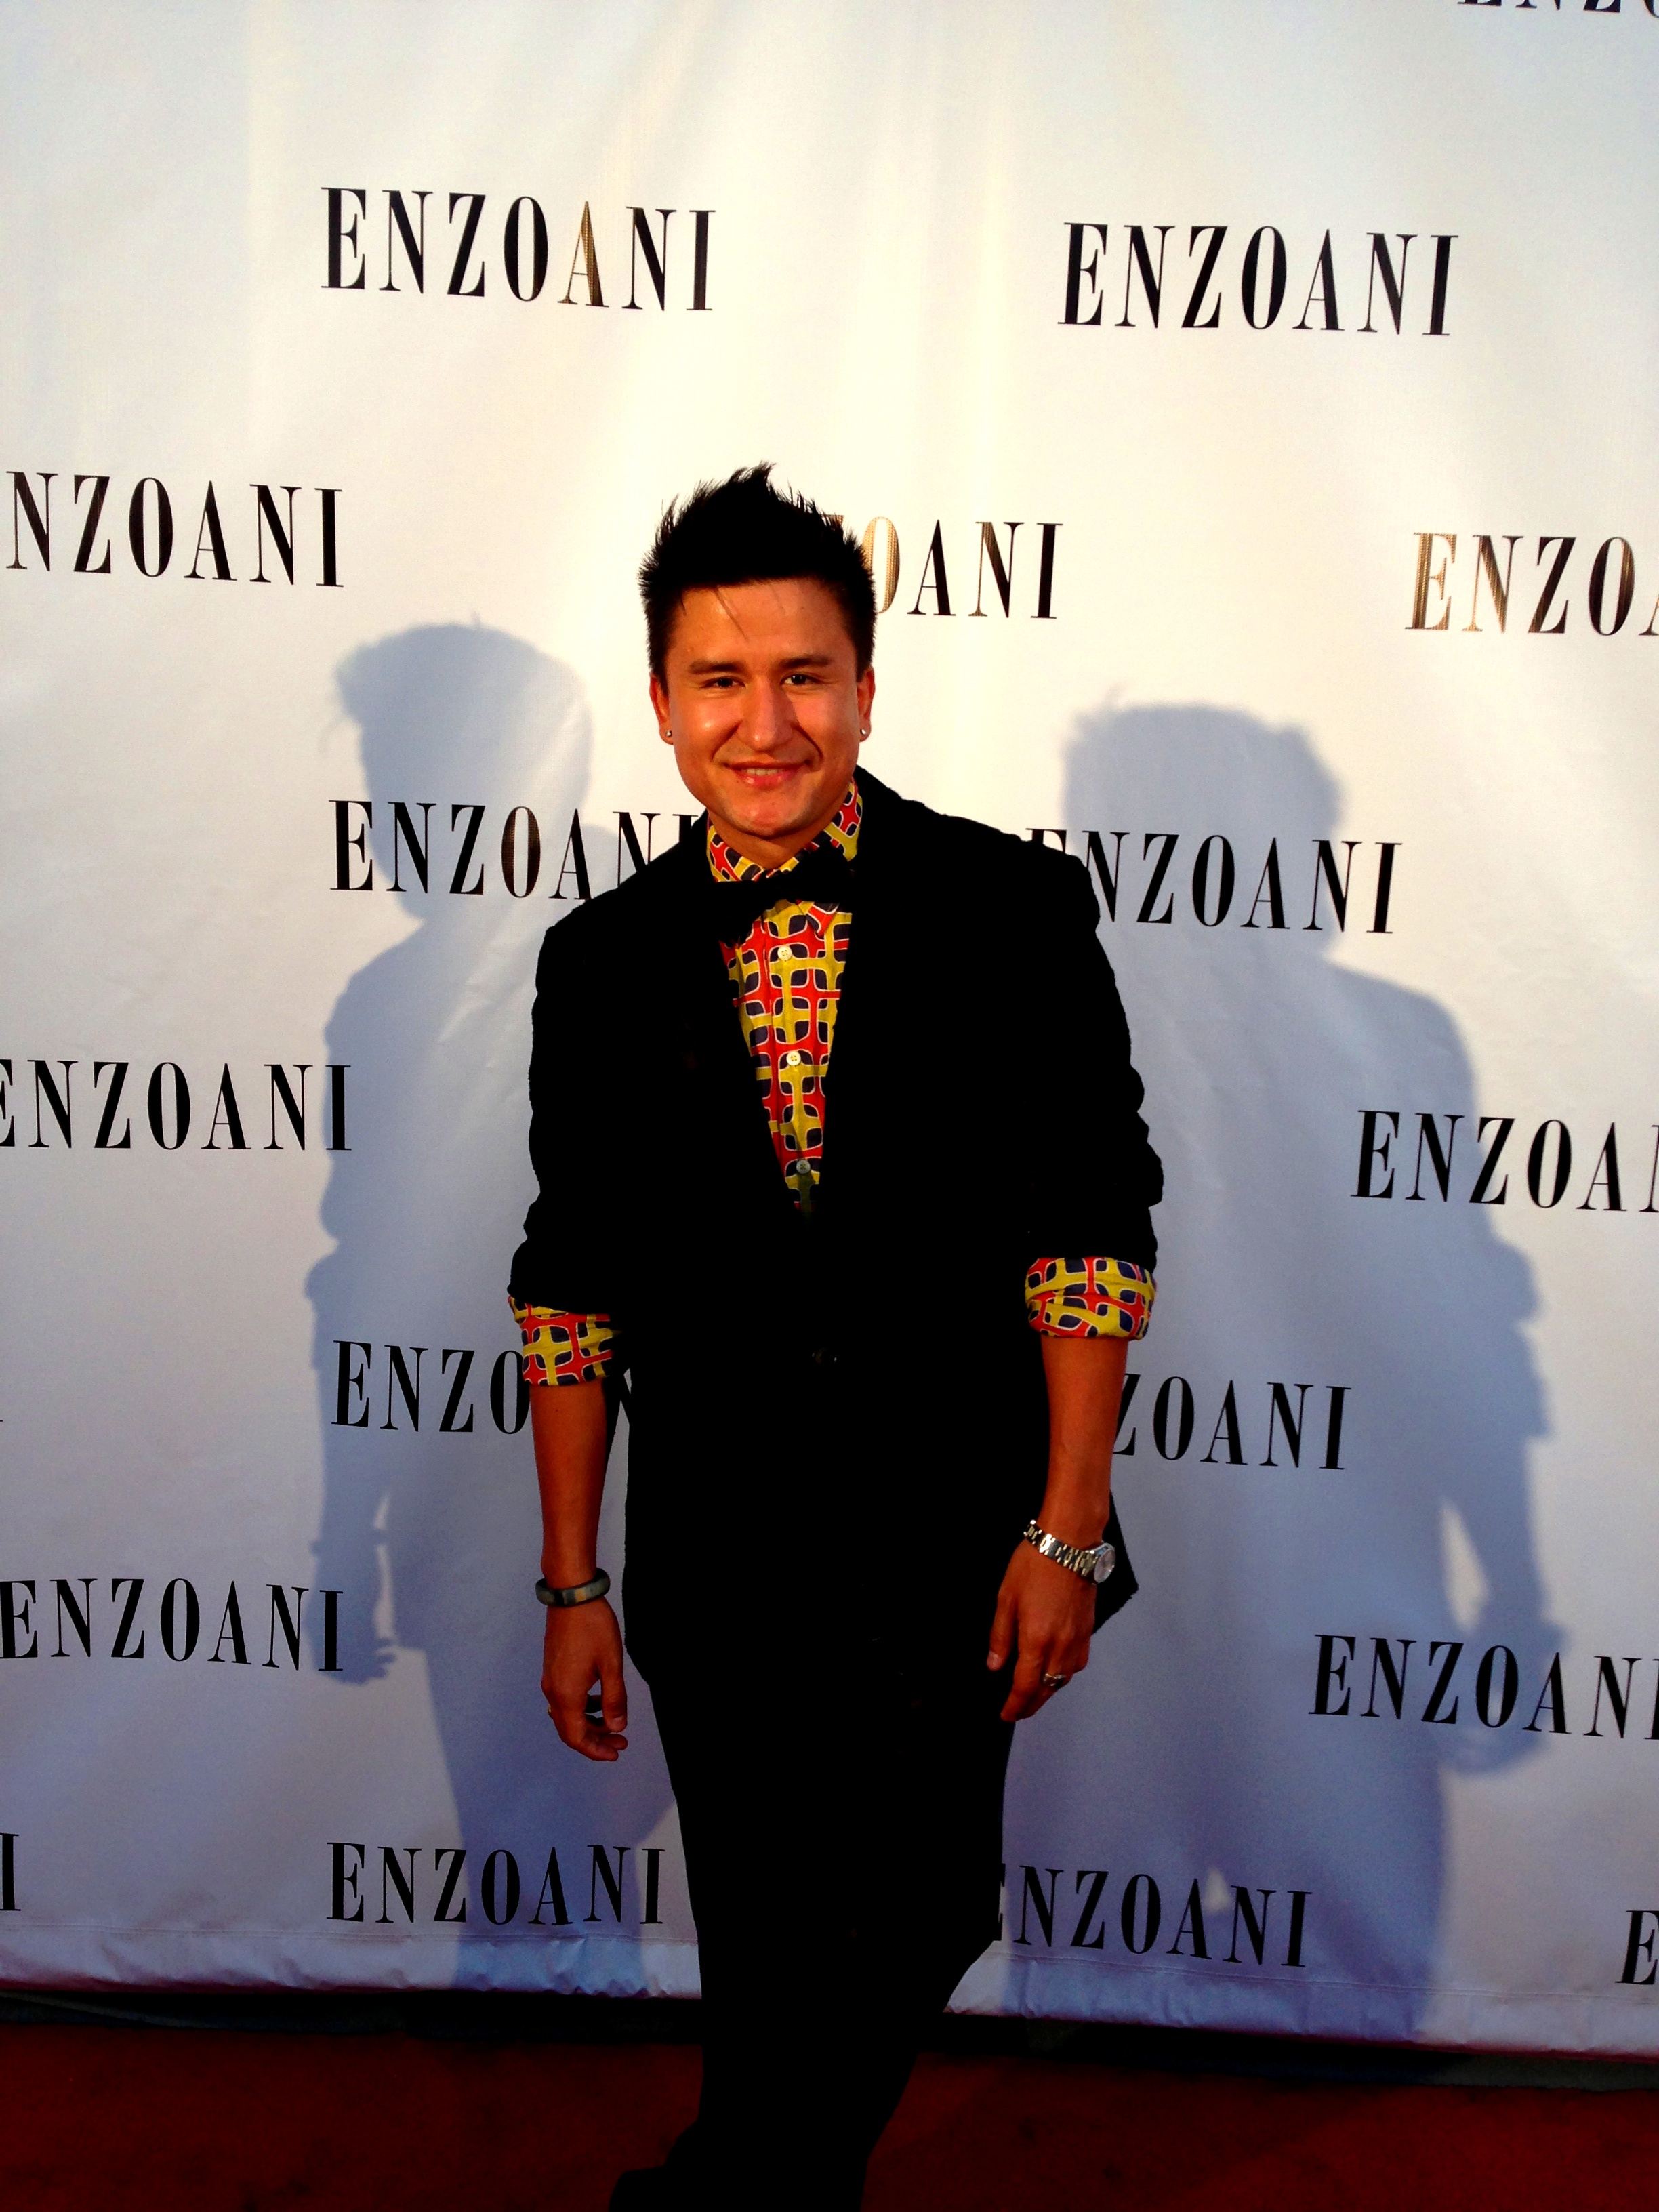 On the Red-Carpet at the Enzoani 2013 Private Fashion Show in Newport Beach, CA.